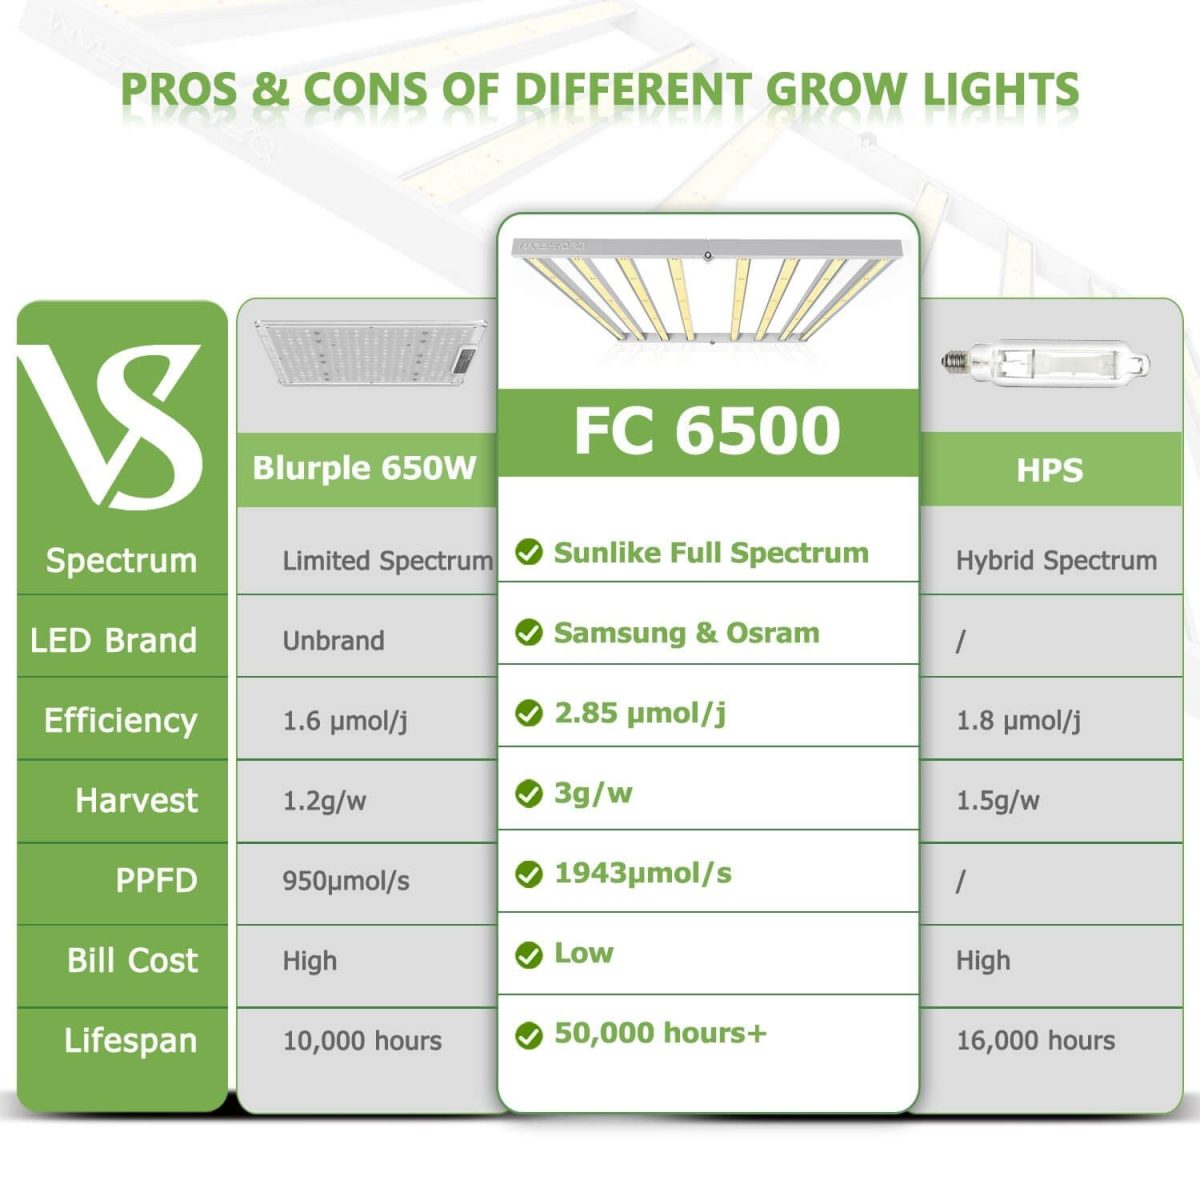 FC6500 led grow light performs much better than other 650w lights in power draw, diode brand, PPE, max yield.